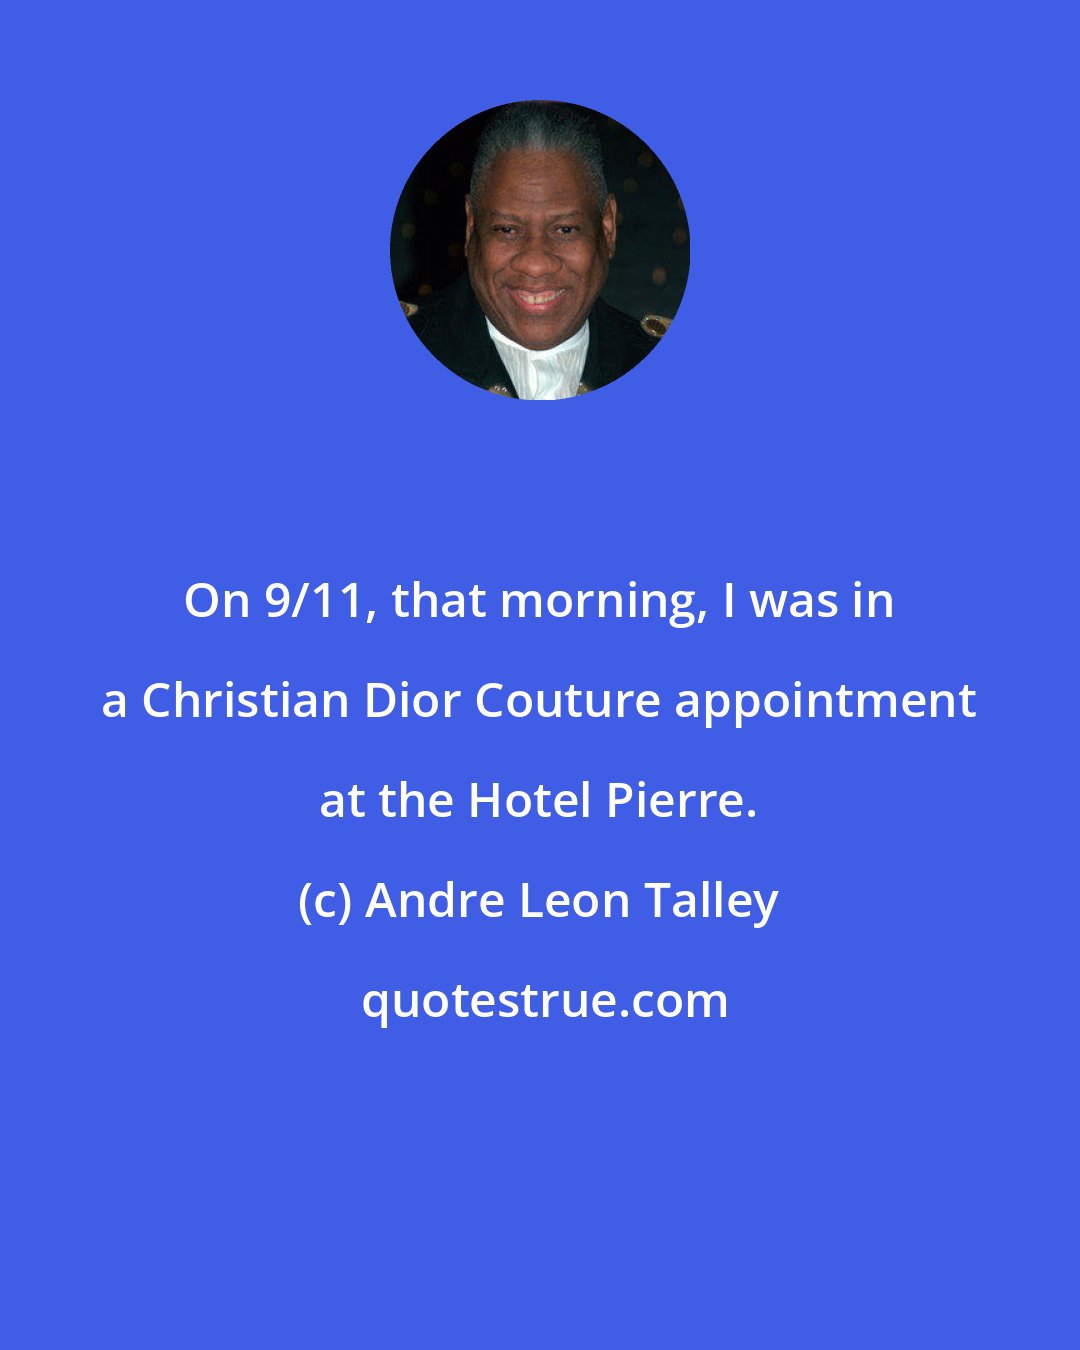 Andre Leon Talley: On 9/11, that morning, I was in a Christian Dior Couture appointment at the Hotel Pierre.